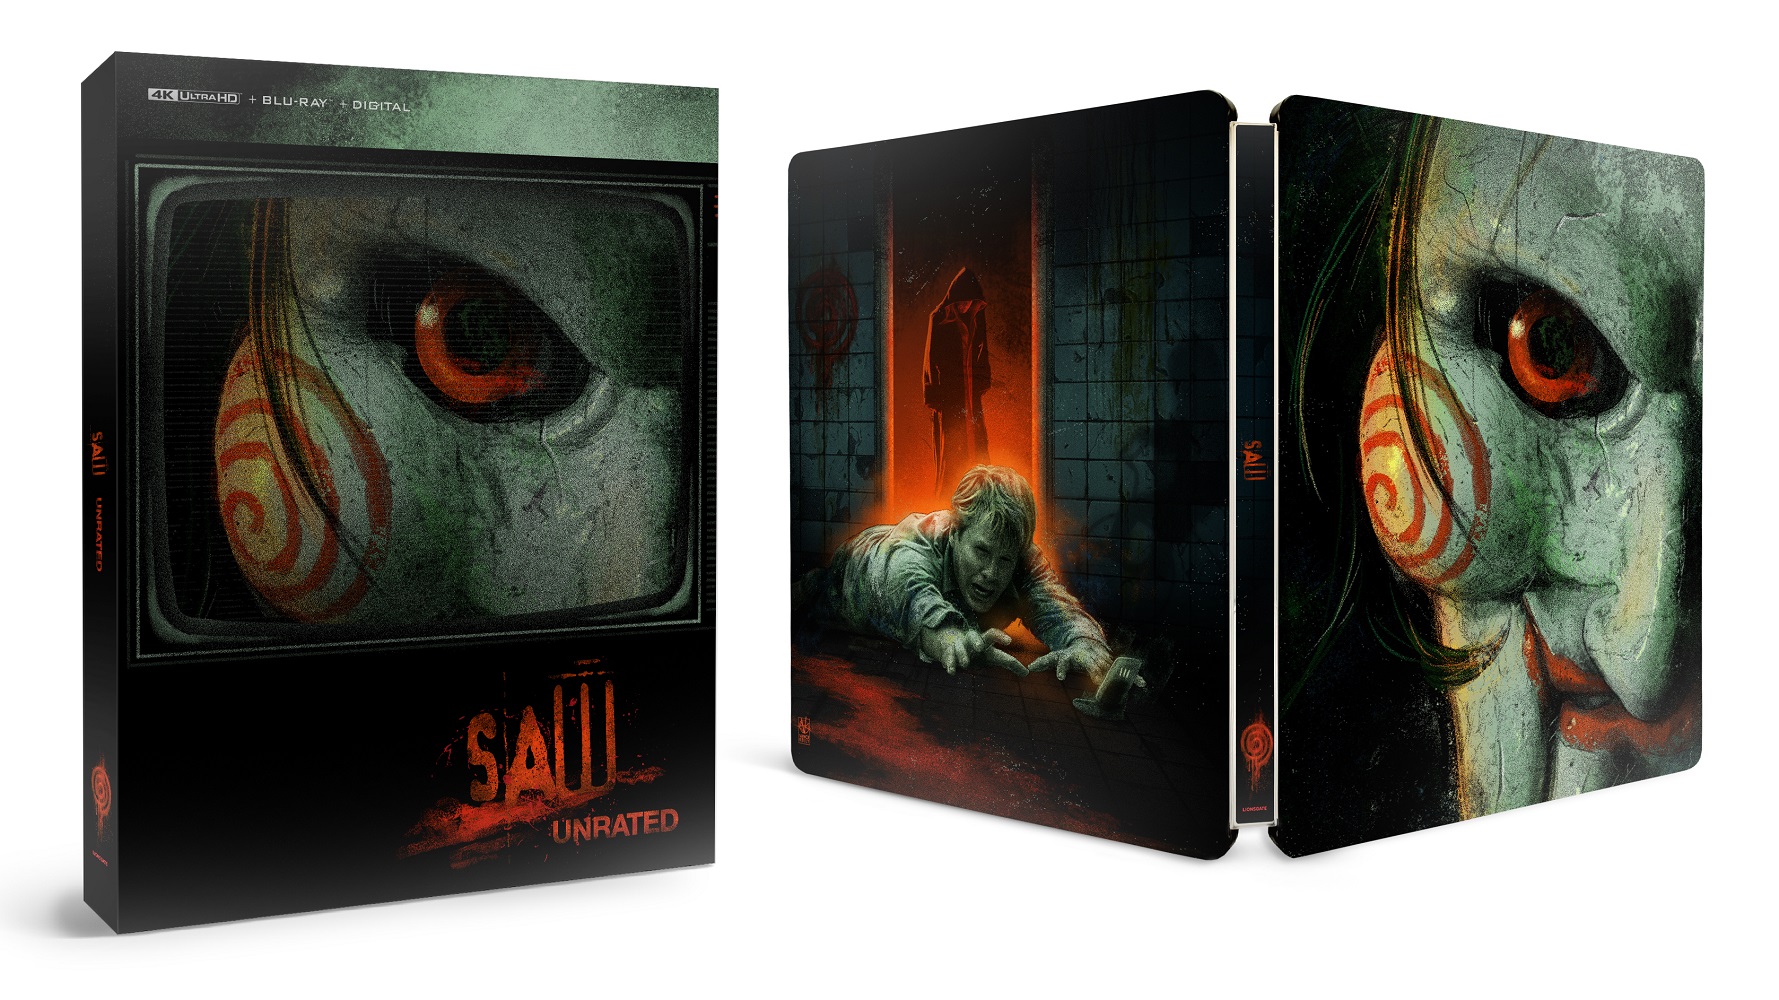 SAW 10 Blu-ray In-store and Online